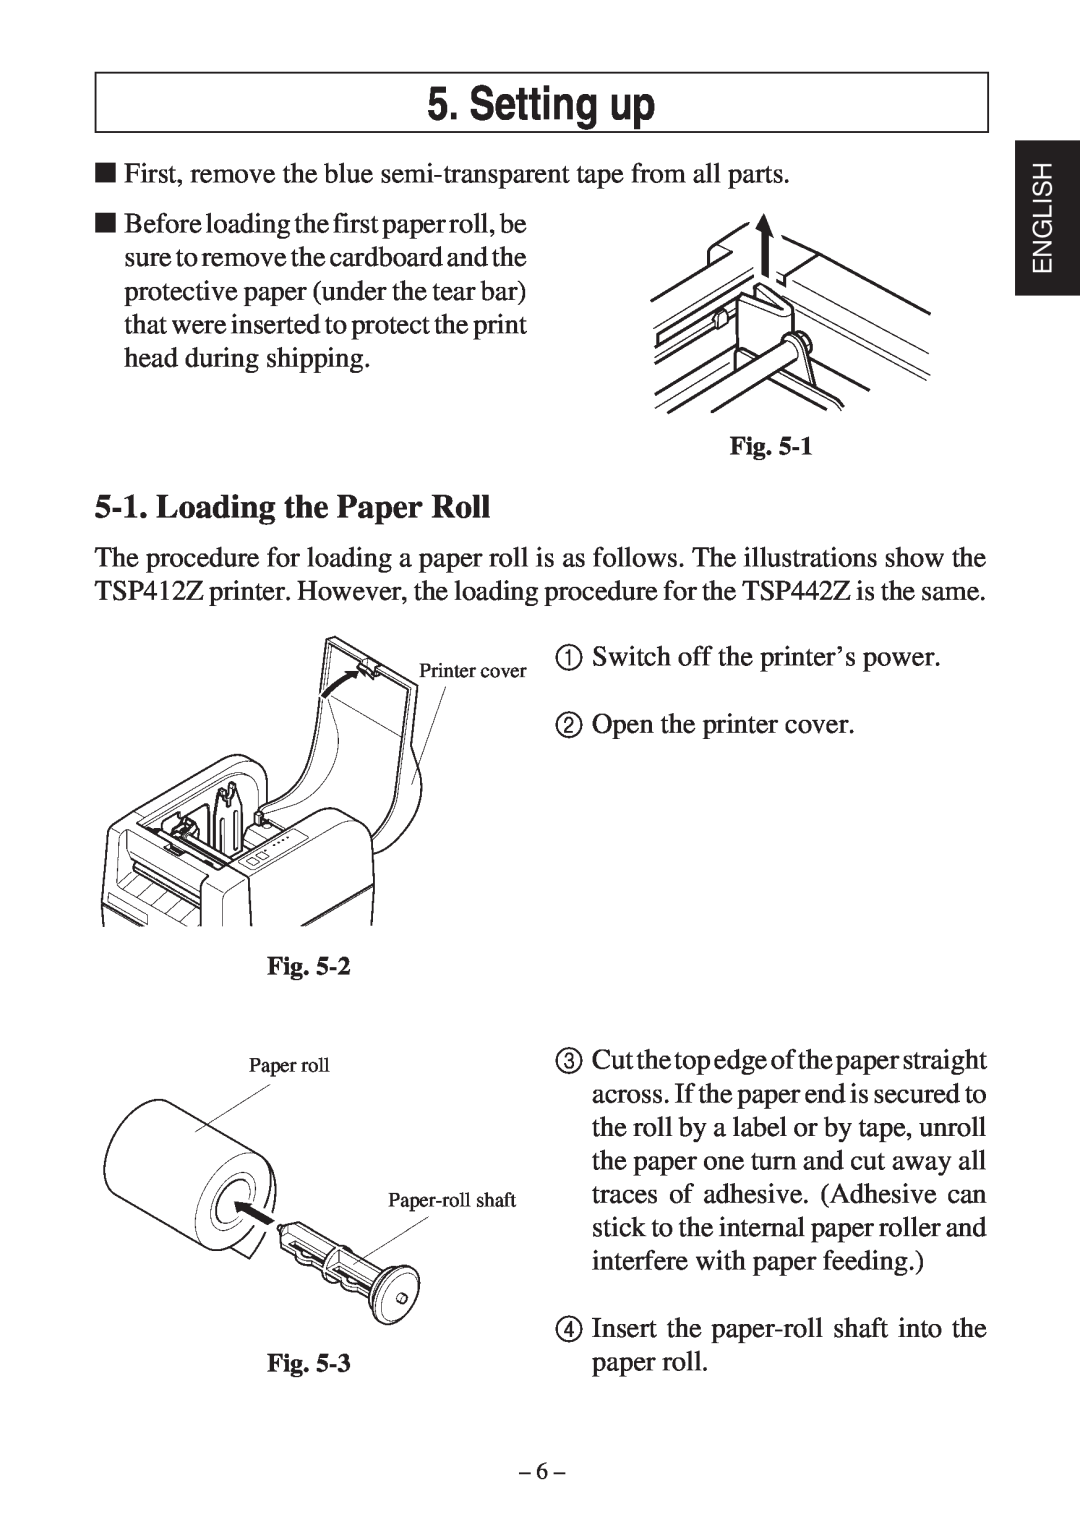 Star Micronics TSP400Z Series user manual Setting up, Loading the Paper Roll 